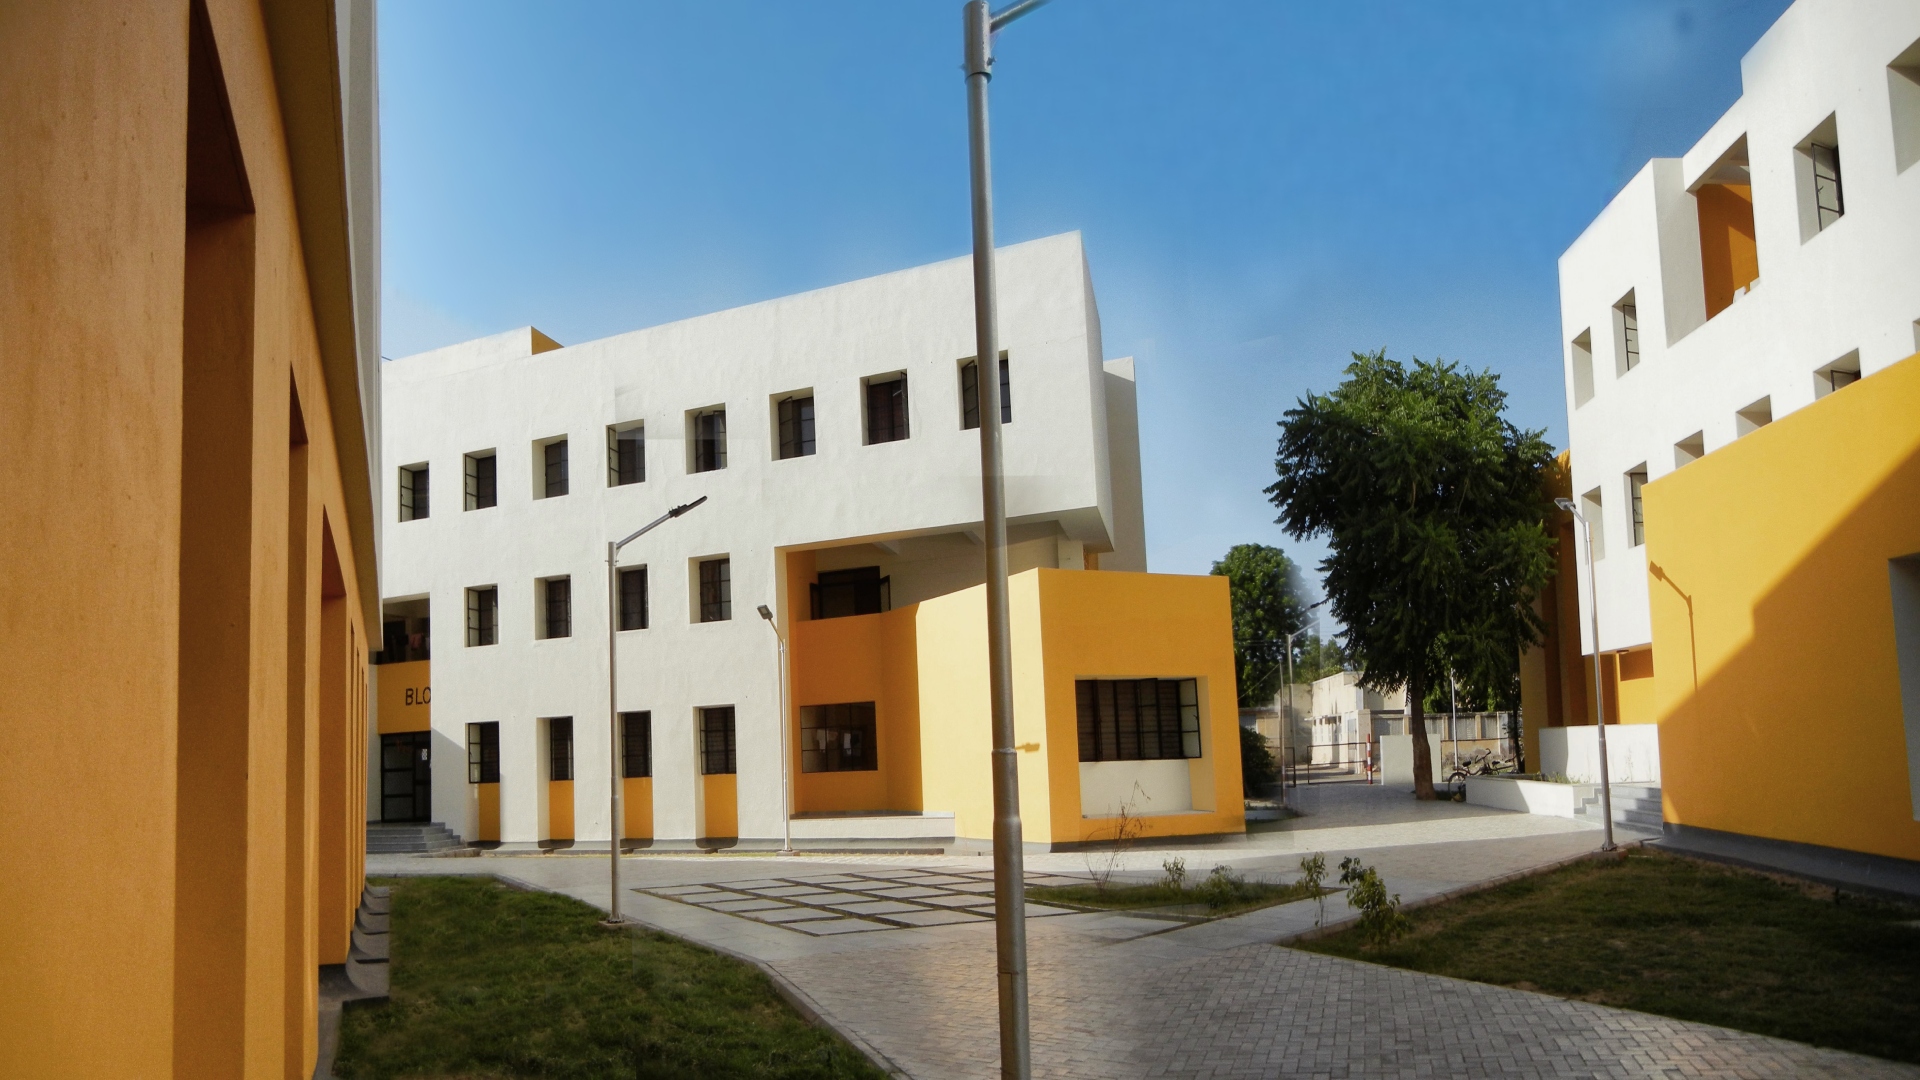 Birla Institute of Technology and Science Pilani